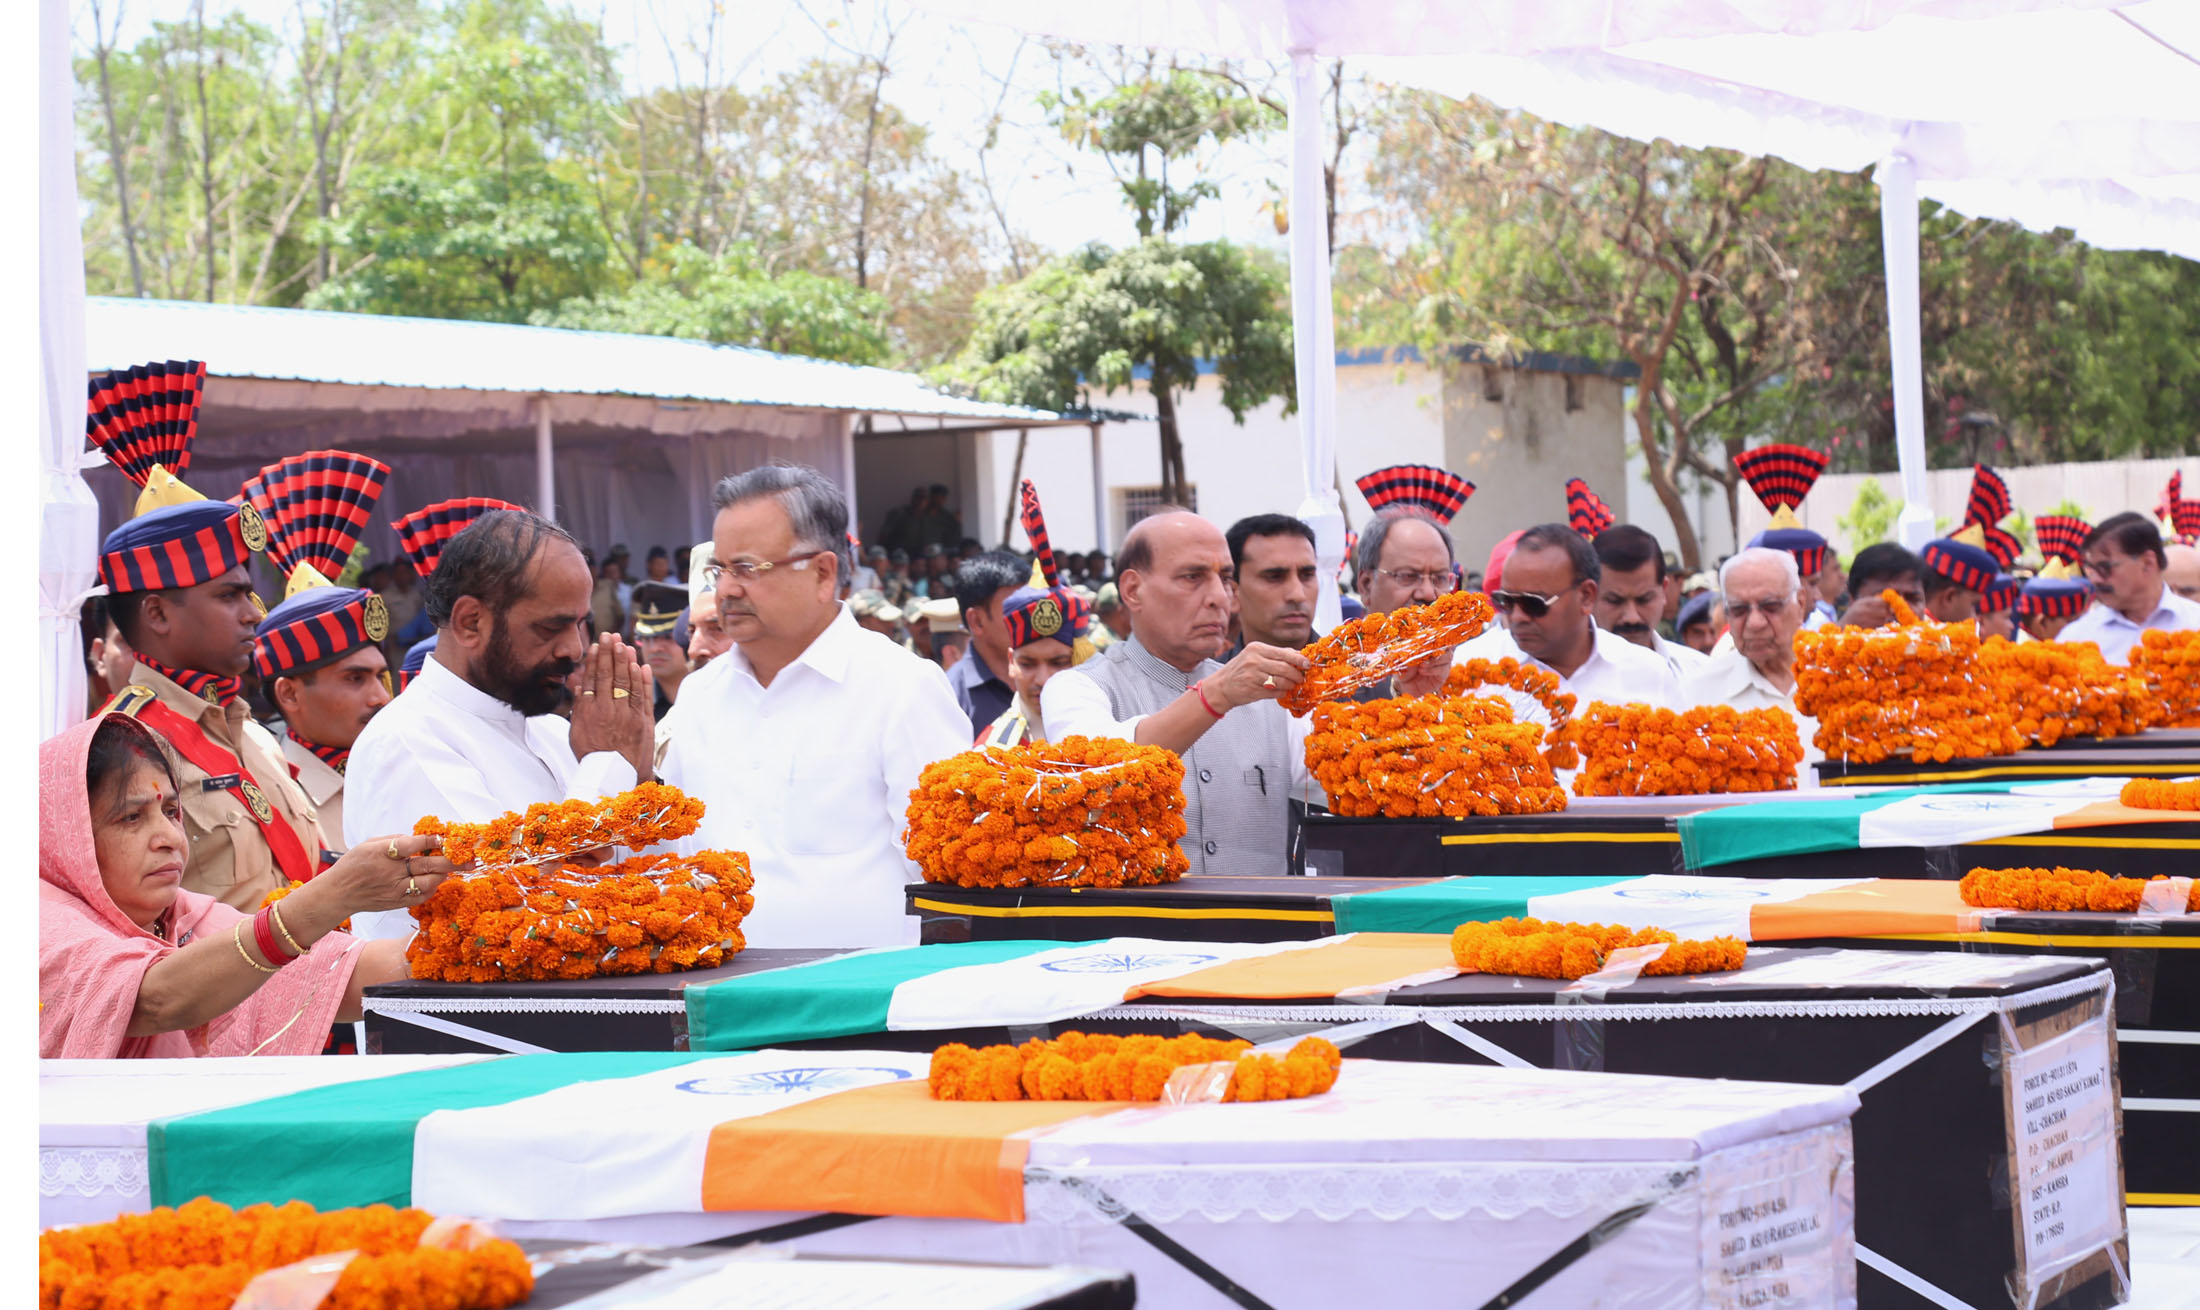 The Union Home Minister, Shri Rajnath Singh paying tributes to the martyred CRPF personnel, in Raipur, Chhattisgarh on April 25, 2017. The Chief Minister of Chhattisgarh, Dr. Raman Singh and the Minister of State for Home Affairs, Shri Hansraj Gangaram Ahir are also seen.